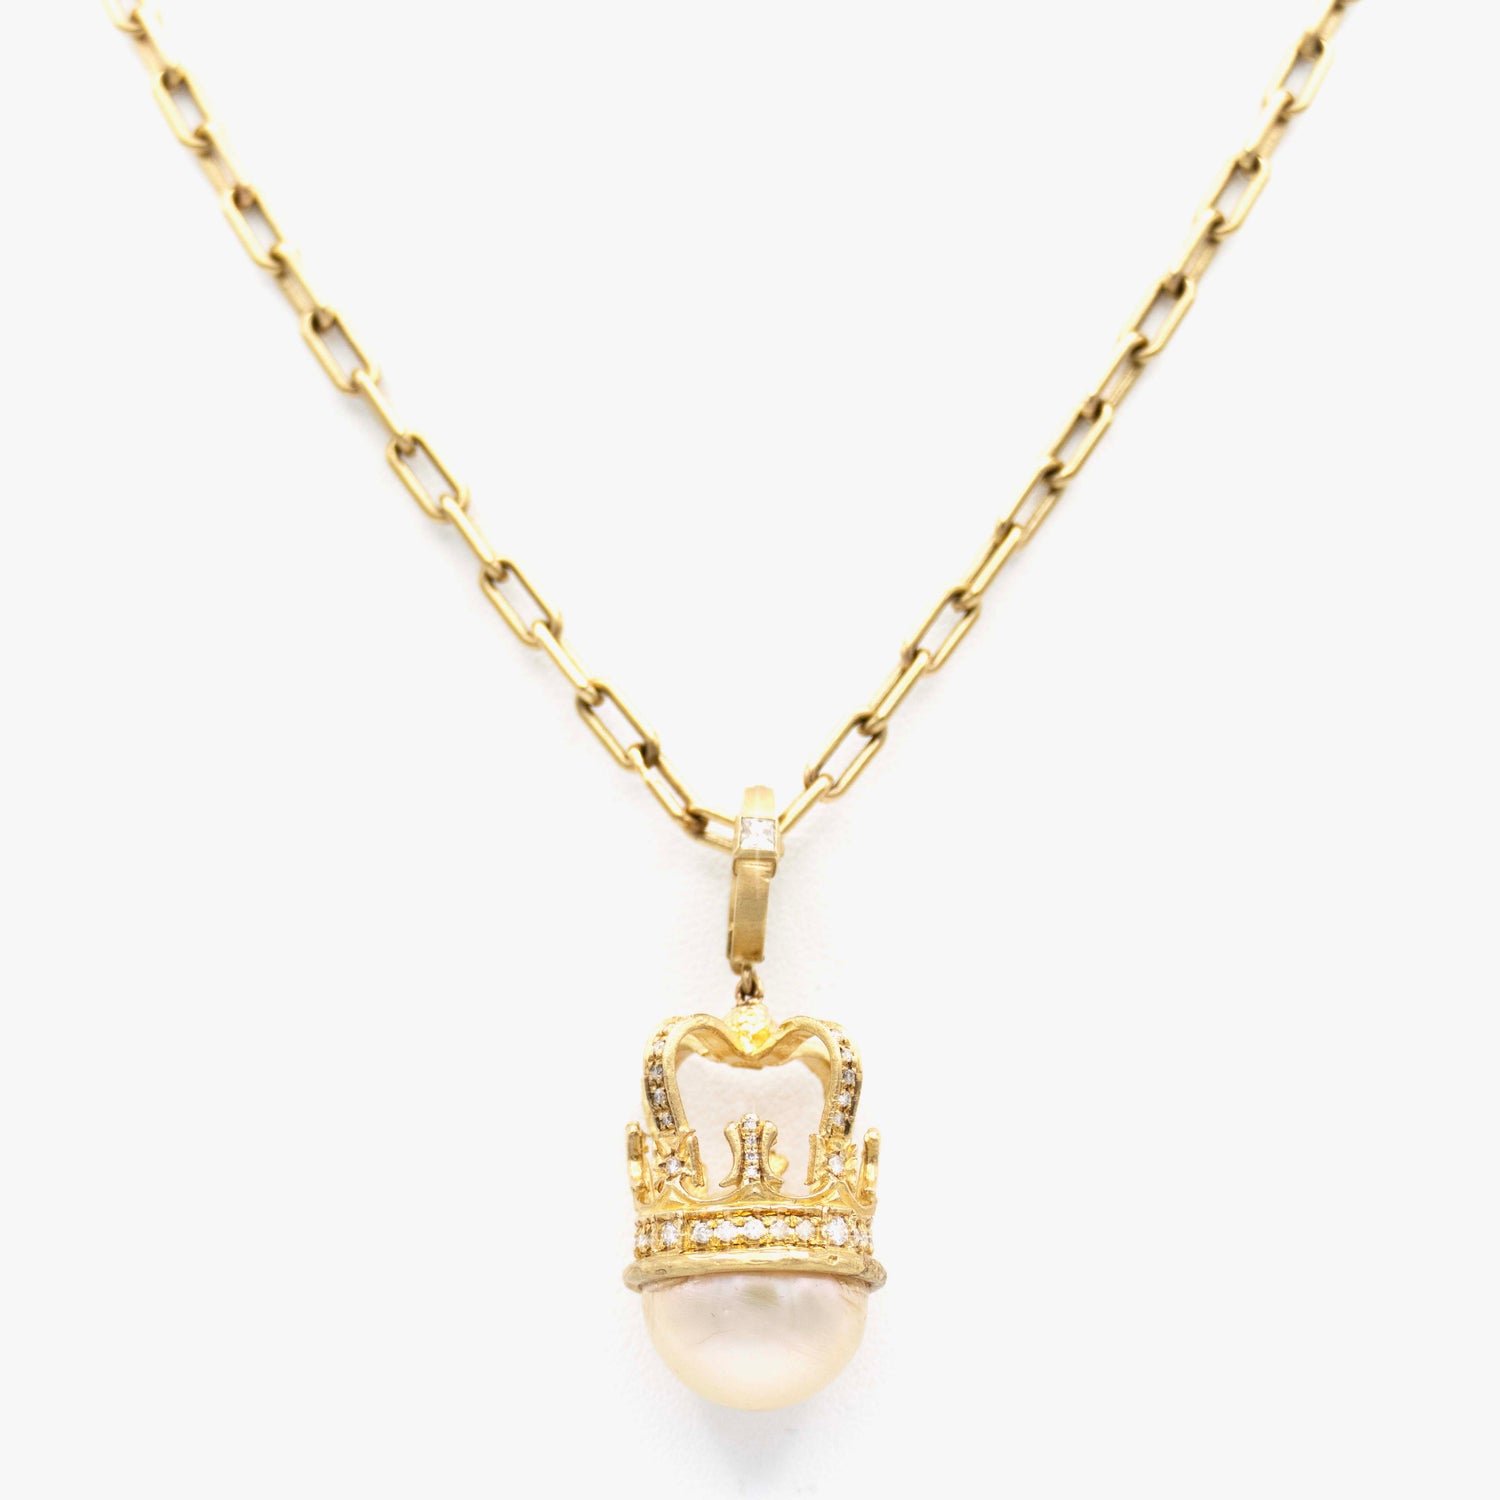 Irit Design 10K Gold and Diamond Crown Necklace